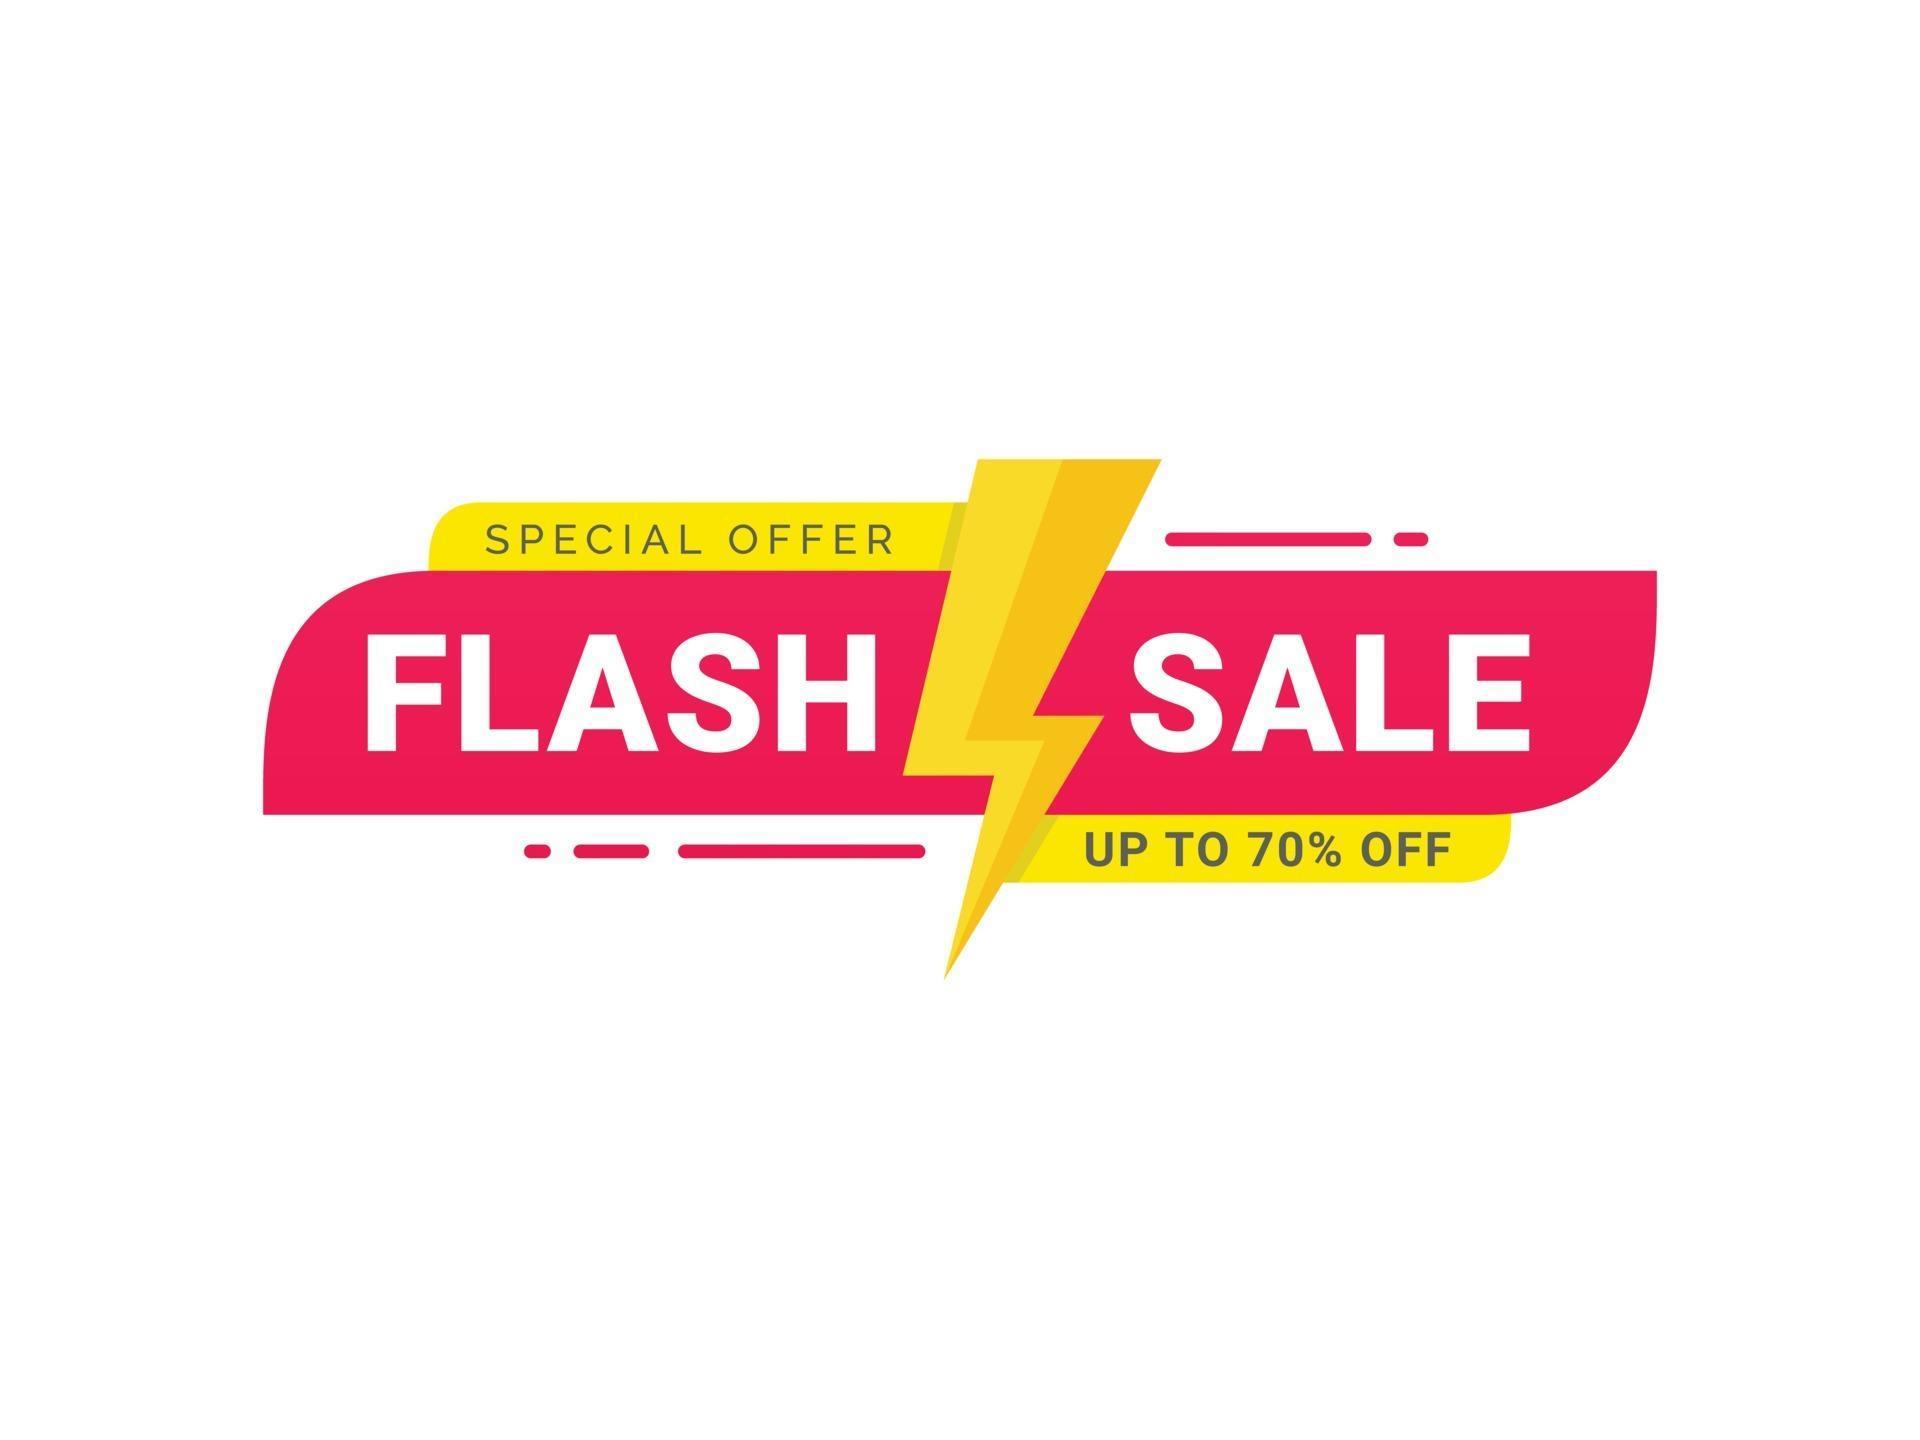 Flash Sale Discount Special Offer Banner Price Discount Promotion